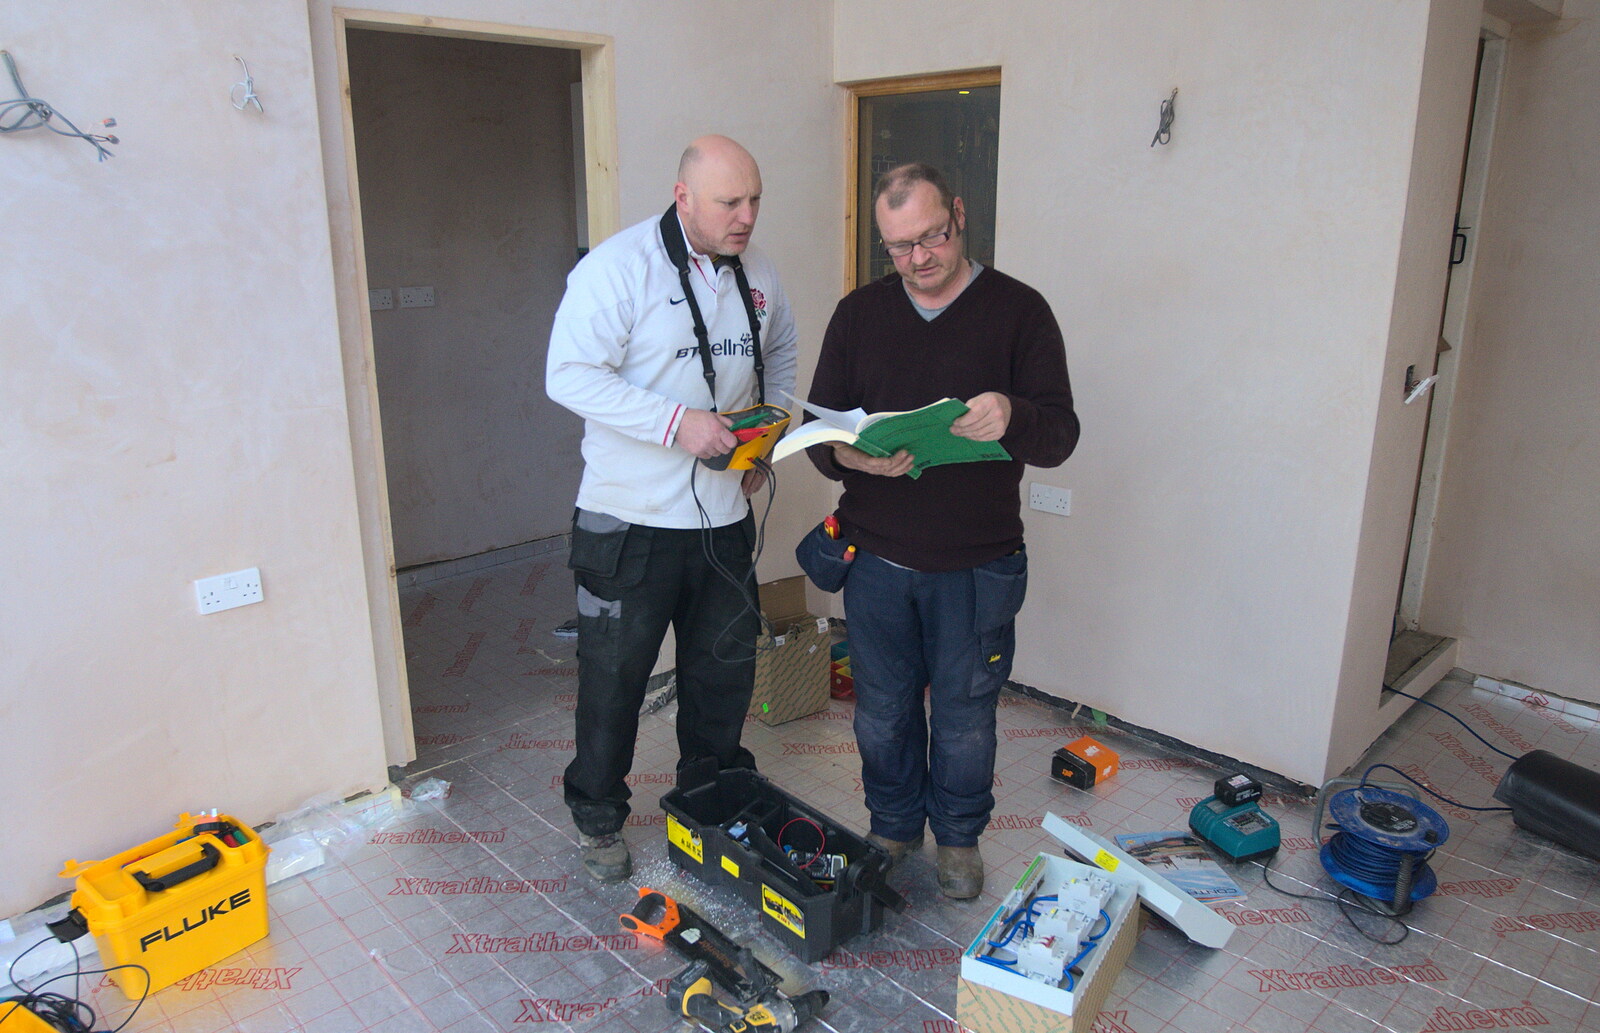 Boomer checks on the wiring regulations from Building Progress: Electrical Second Fixing, Brome, Suffolk - 4th March 2014